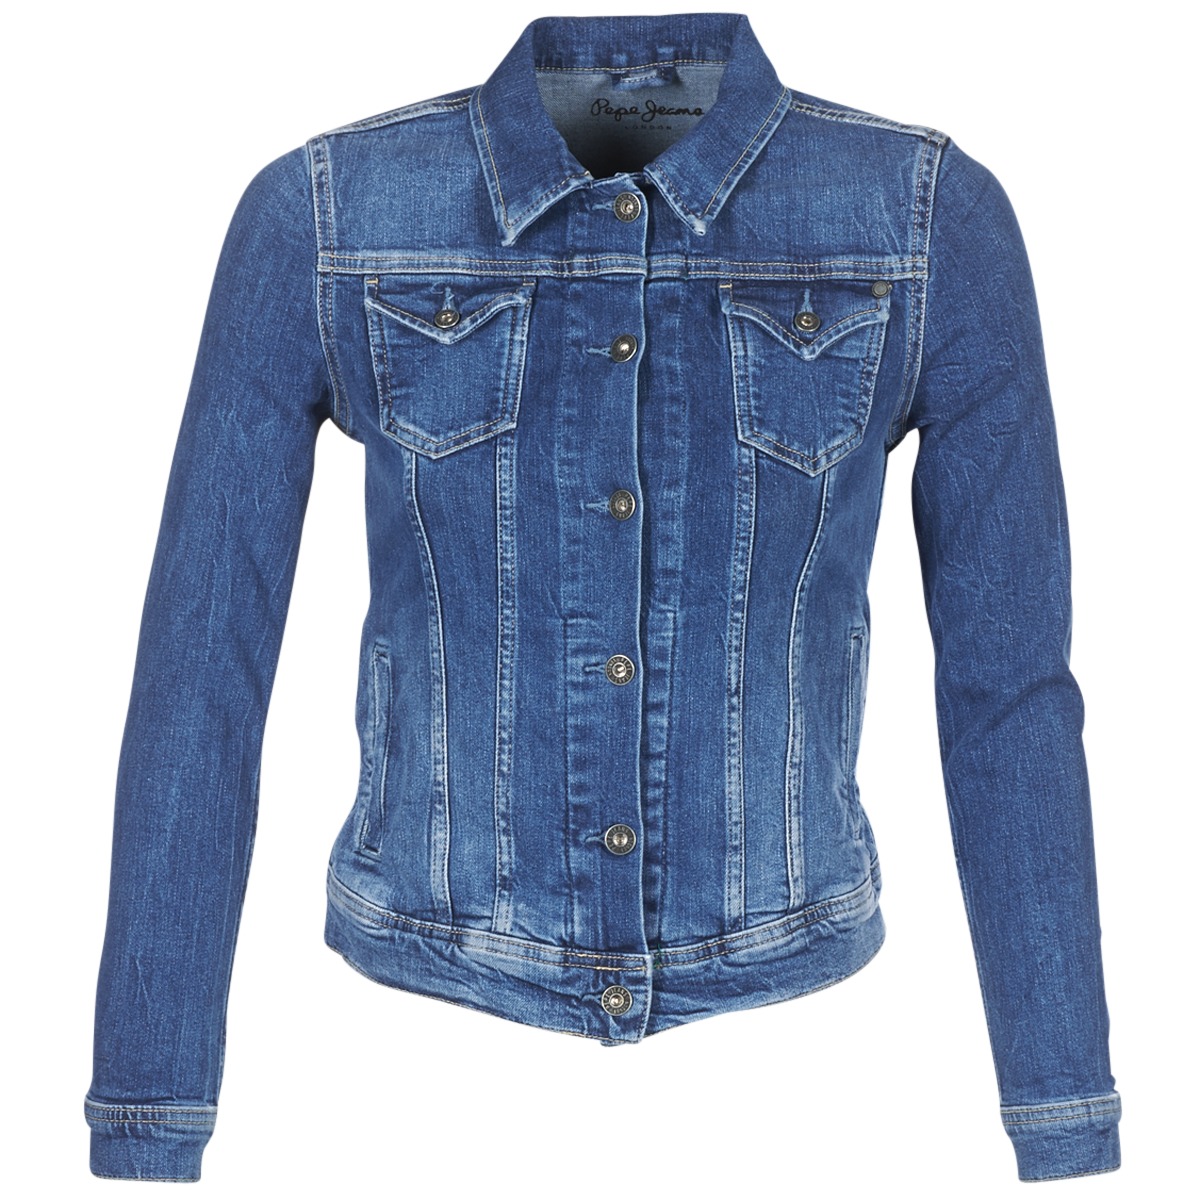 Pepe / Fast Europe jeans | Medium Clothing Denim delivery - ! 87,20 - Blue Spartoo THRIFT Women jackets €